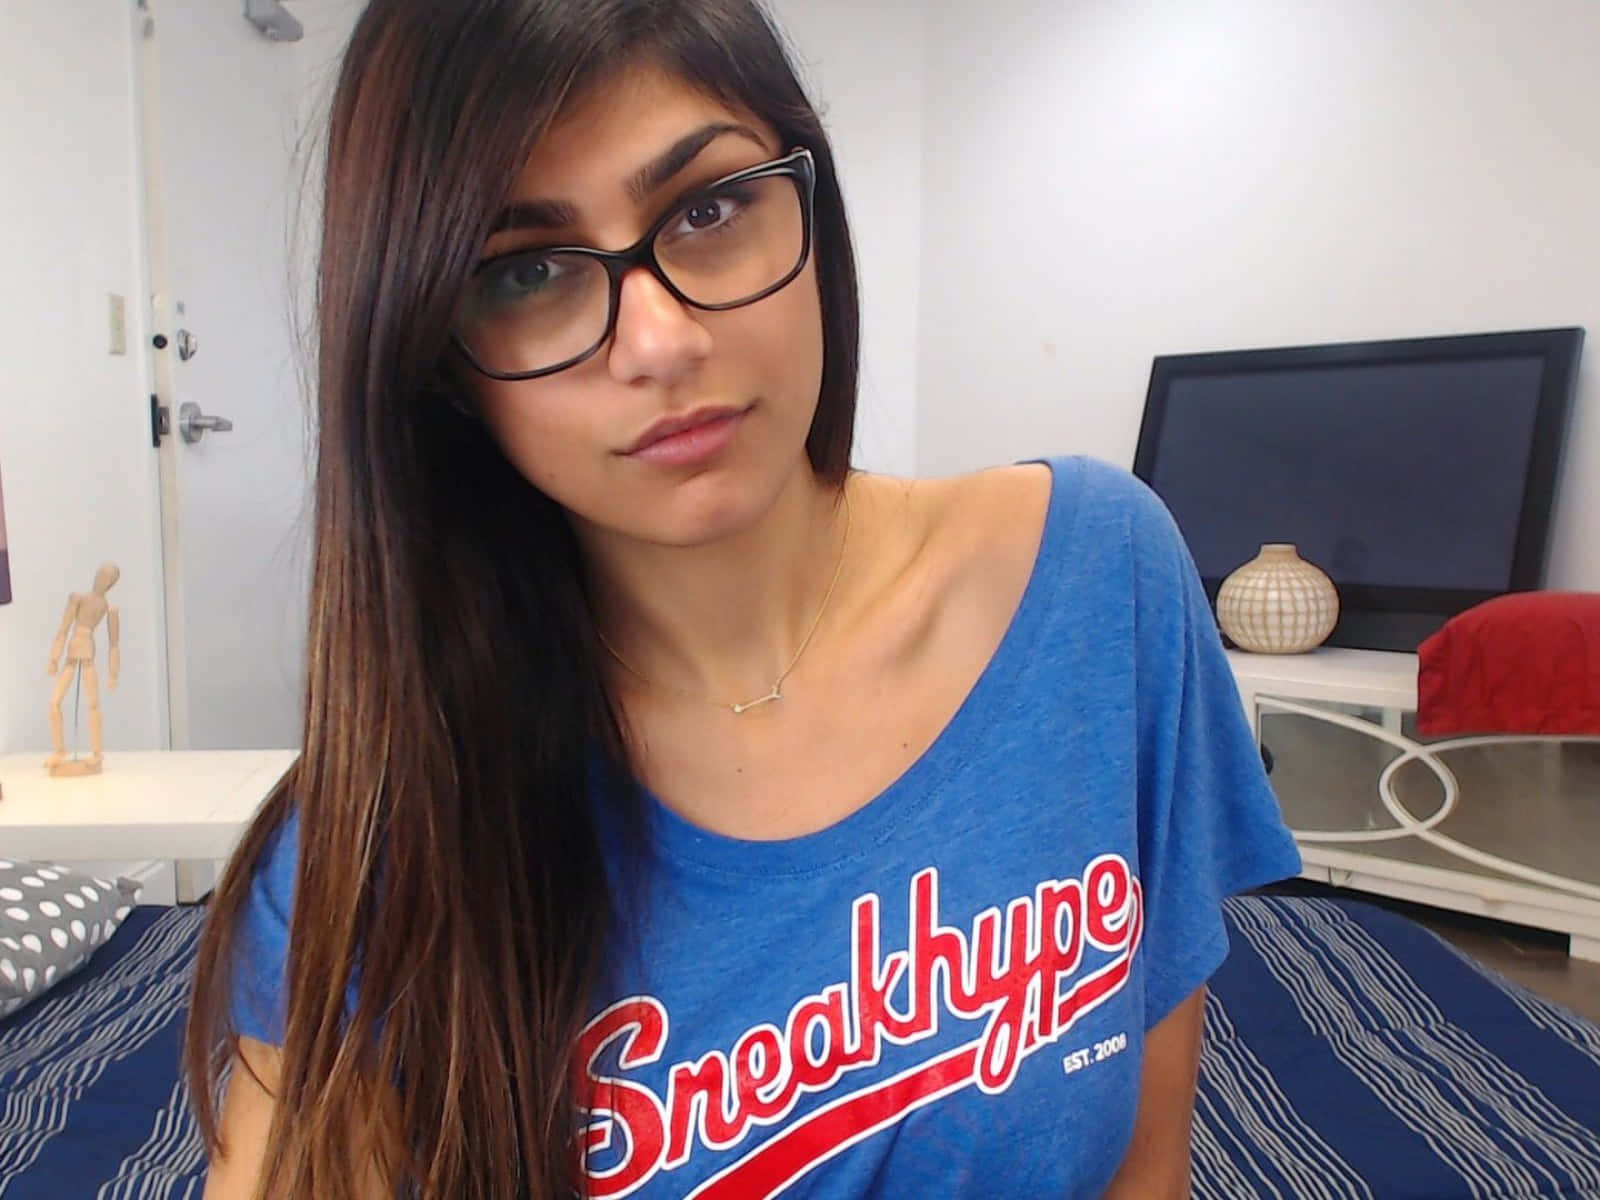 A Girl Wearing Glasses And A Blue Shirt